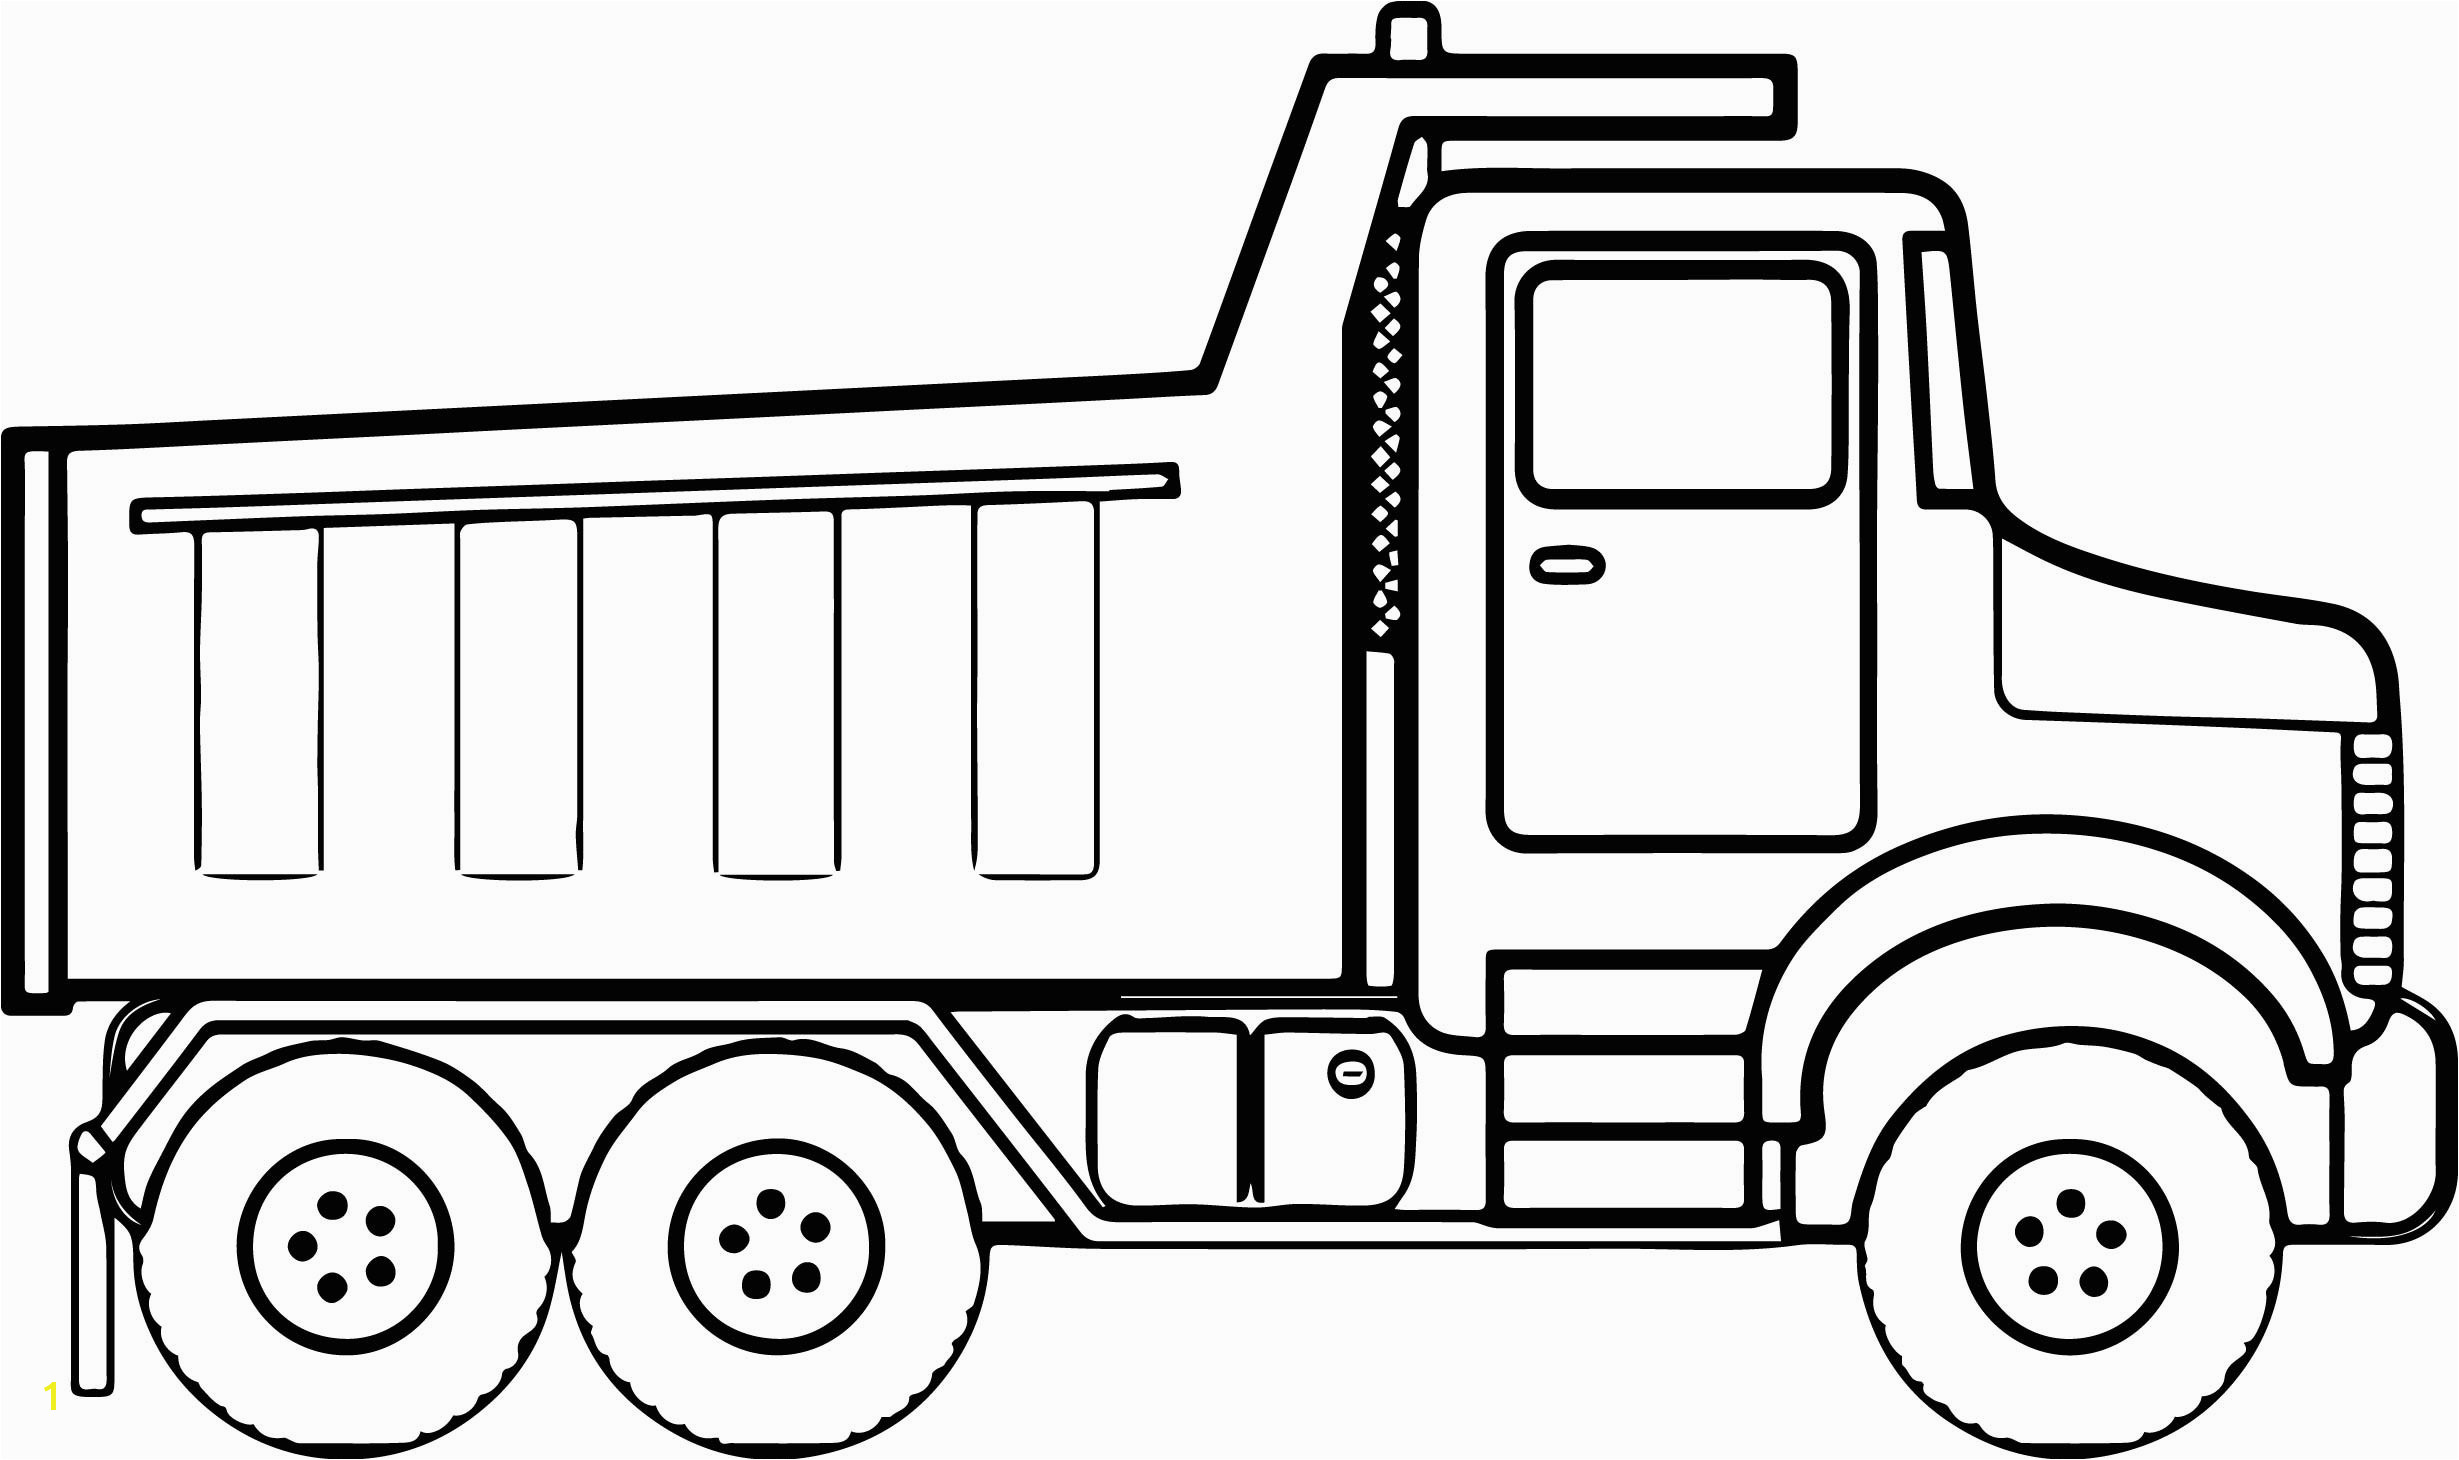 Easy Dump Truck Coloring Pages Dump Truck Coloring Pages Printable Lovely Coloring Book and Pages